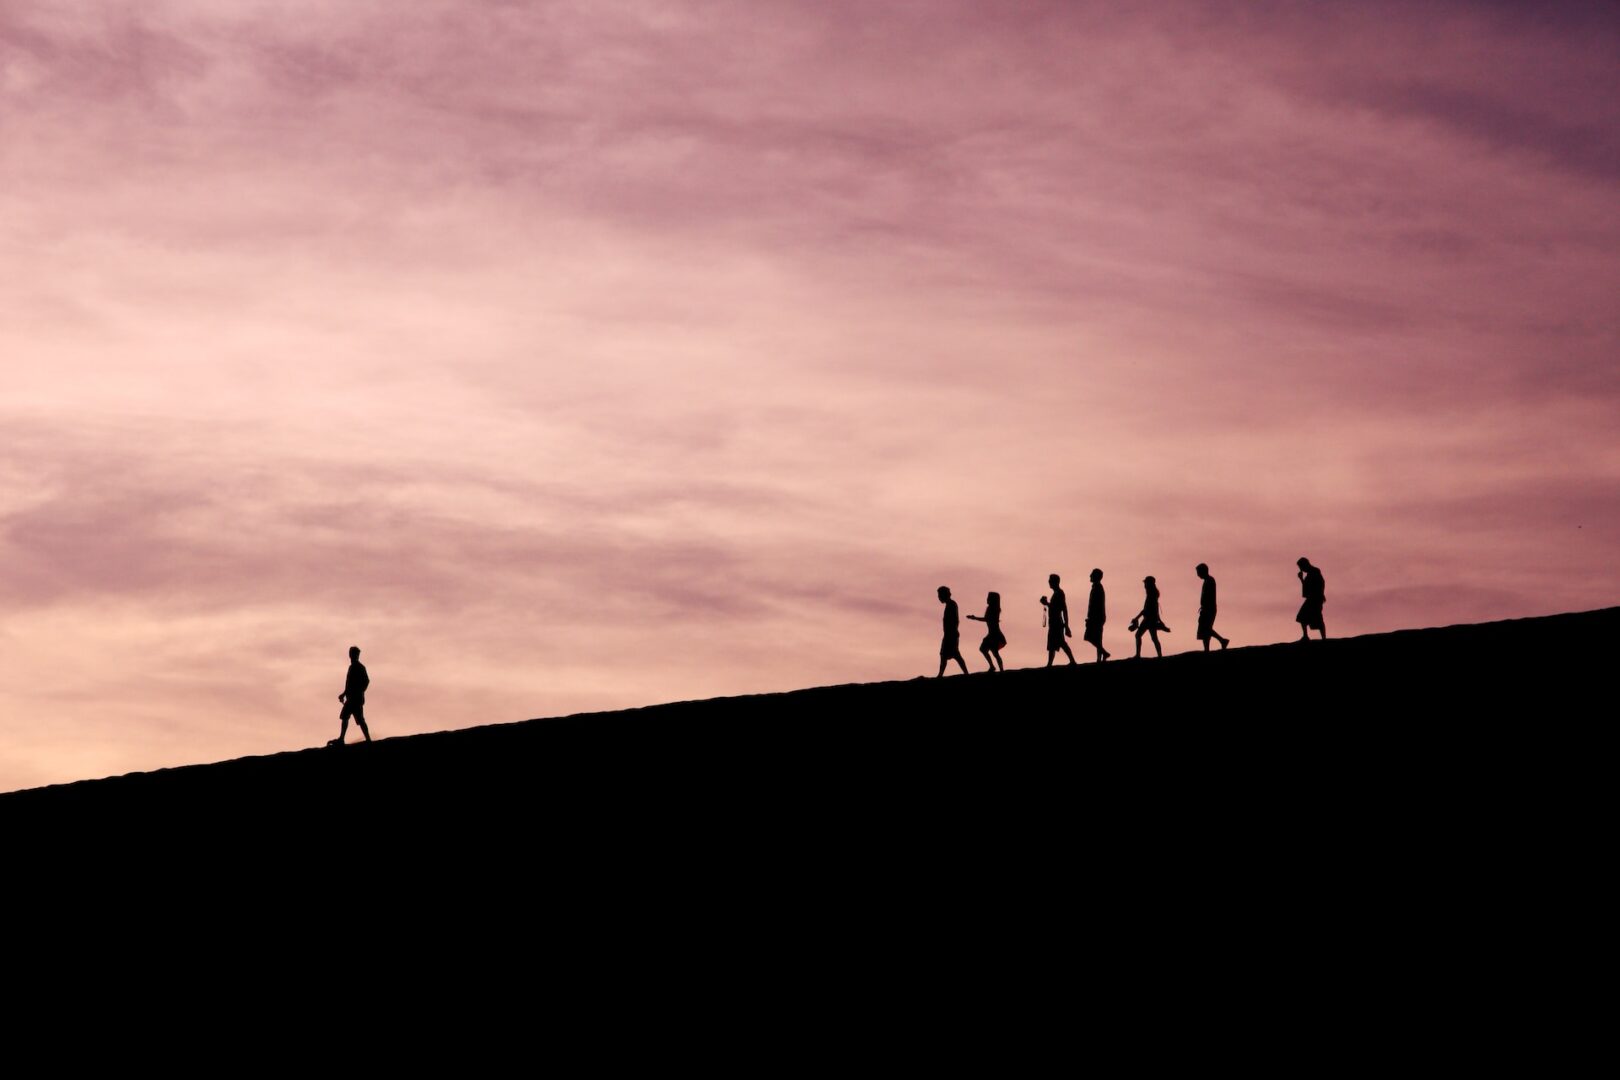 A group of people walking up the side of a hill.